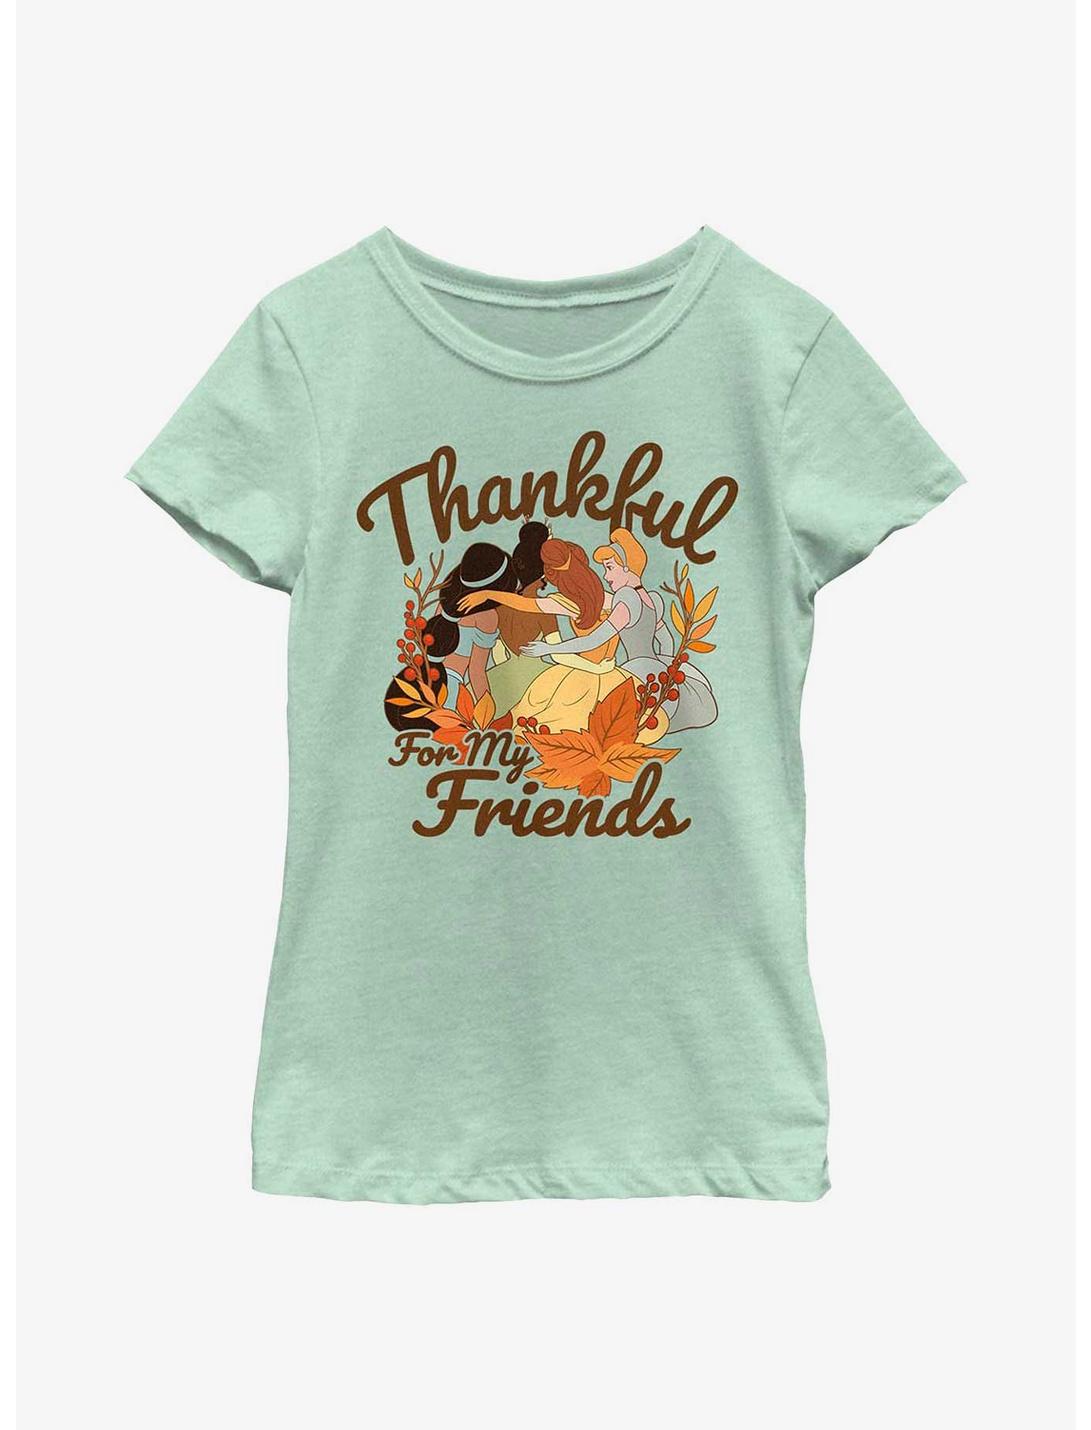 Disney Princesses Thankful For My Friends Youth Girls T-Shirt, MINT, hi-res